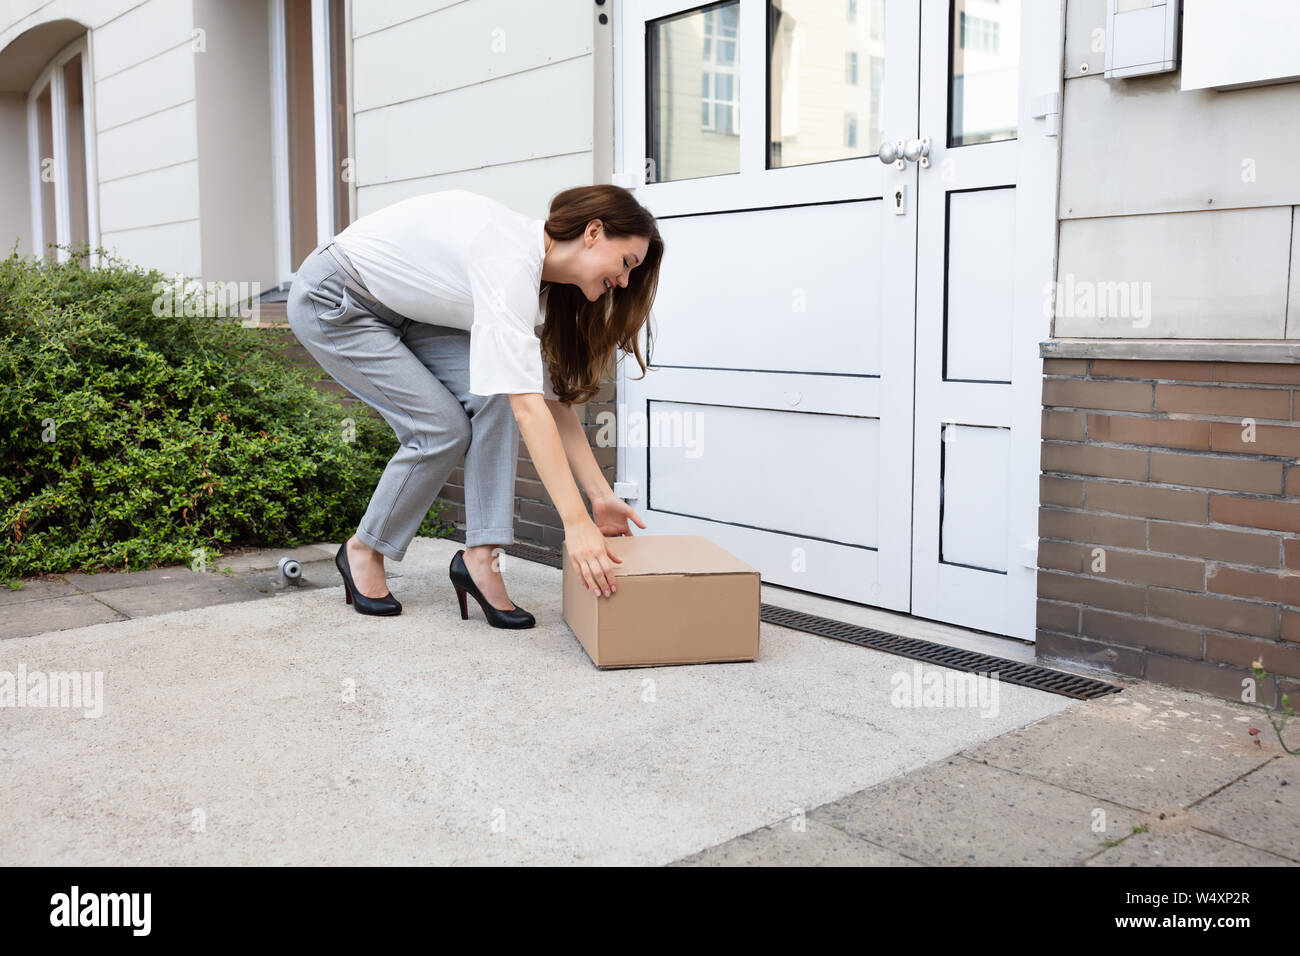 Smiling Young Woman Peeking Up The Delivered Parcel At The Door Entrance Stock Photo